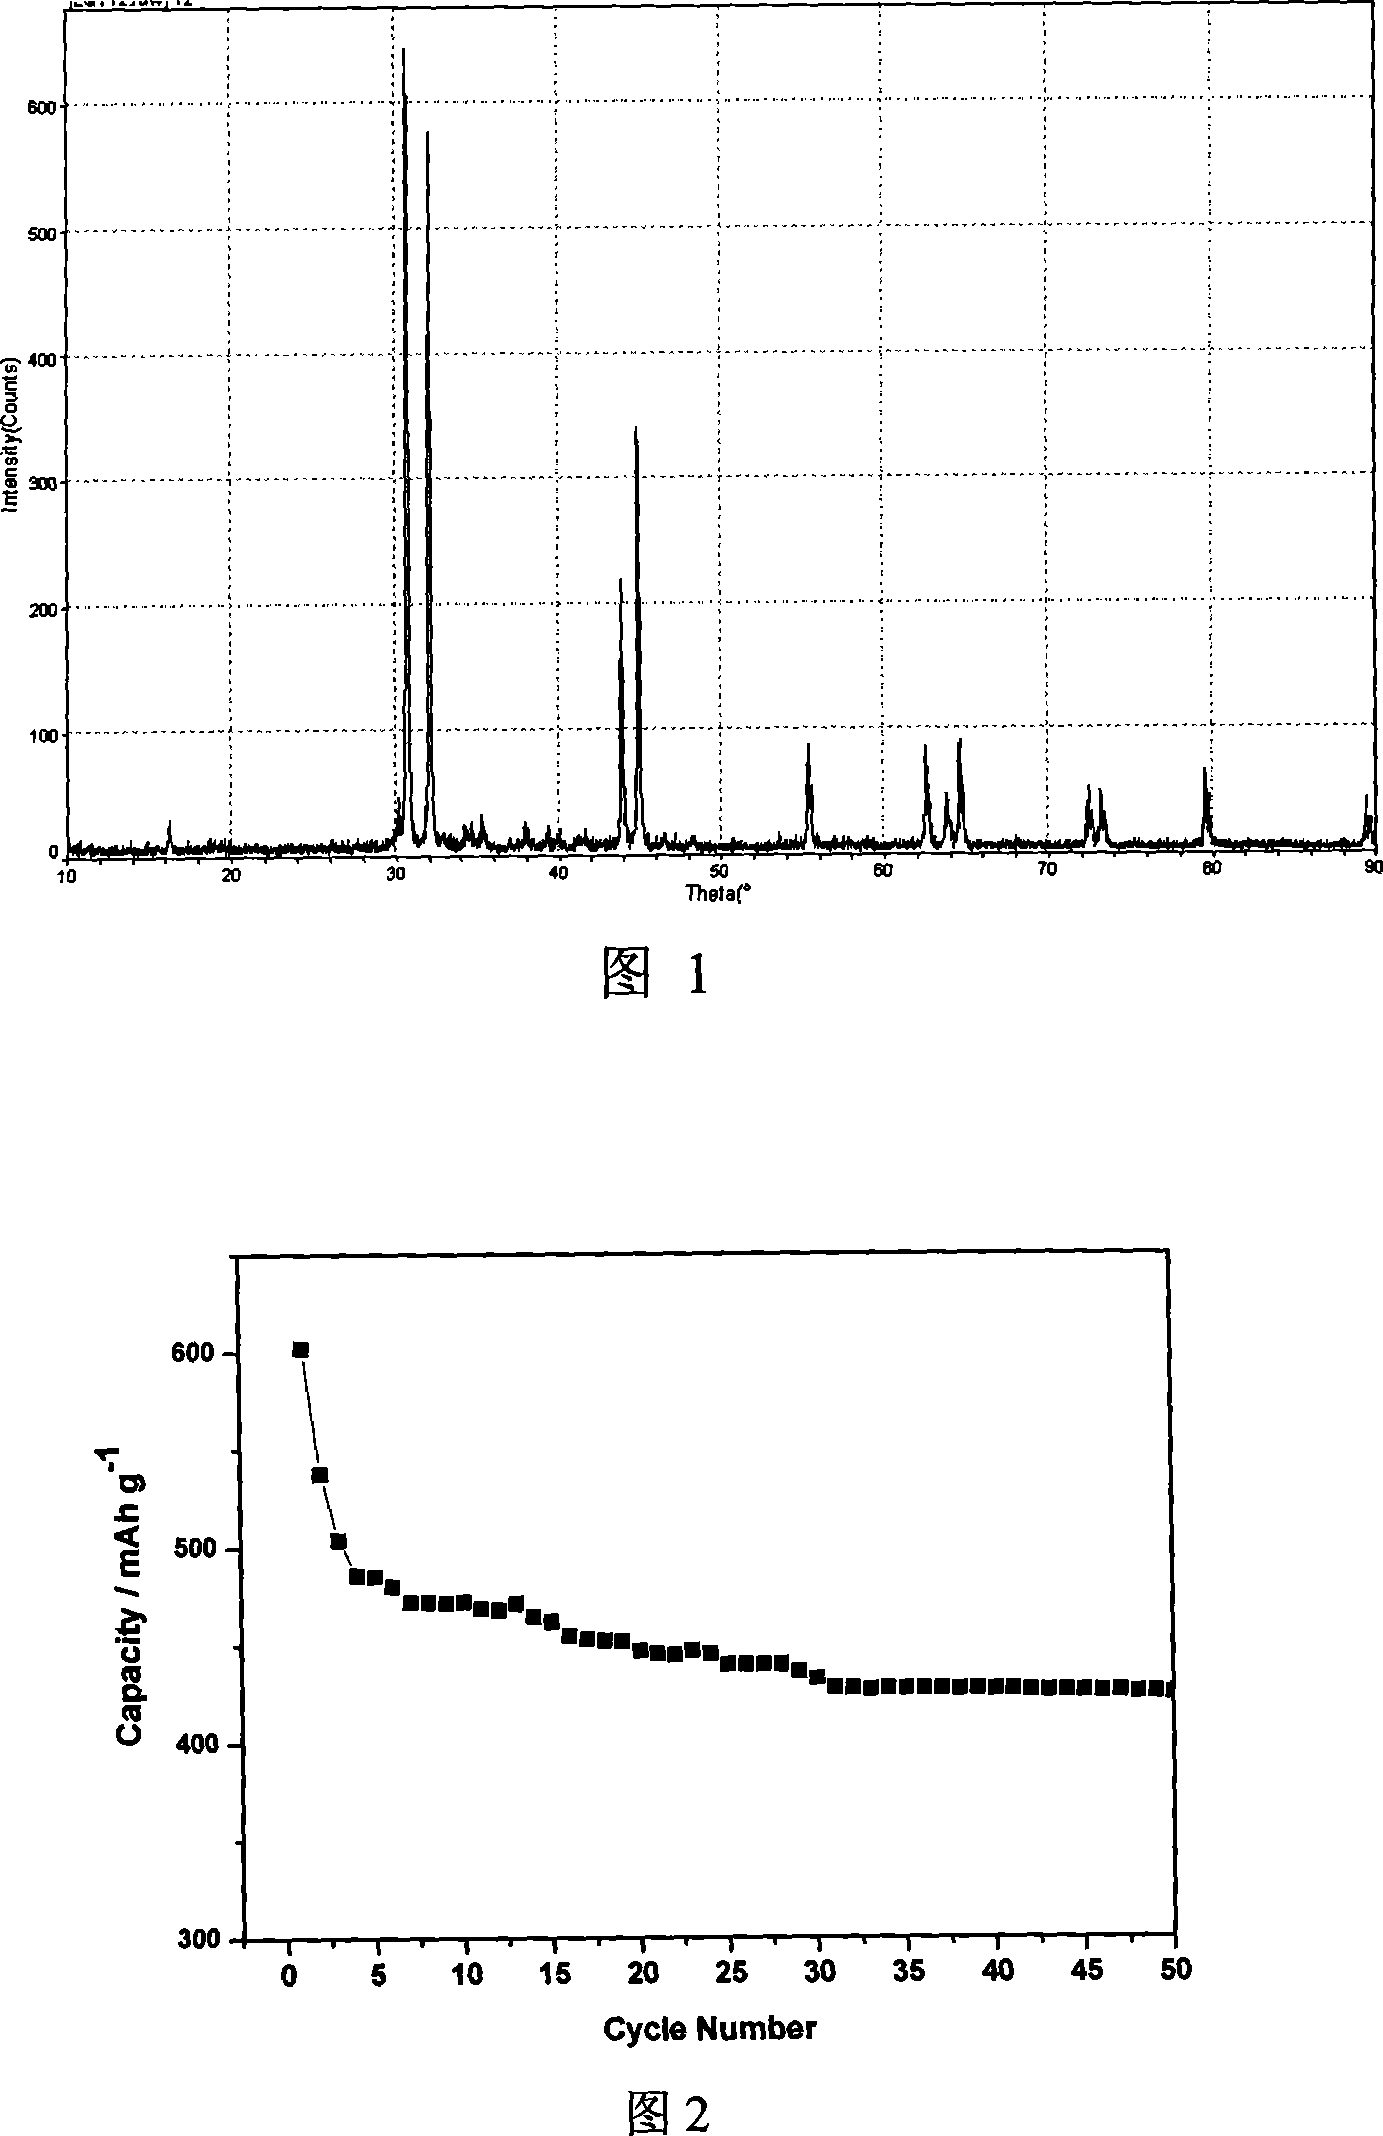 Tin carbon nanometer compound material for lithium ion battery and method for making same